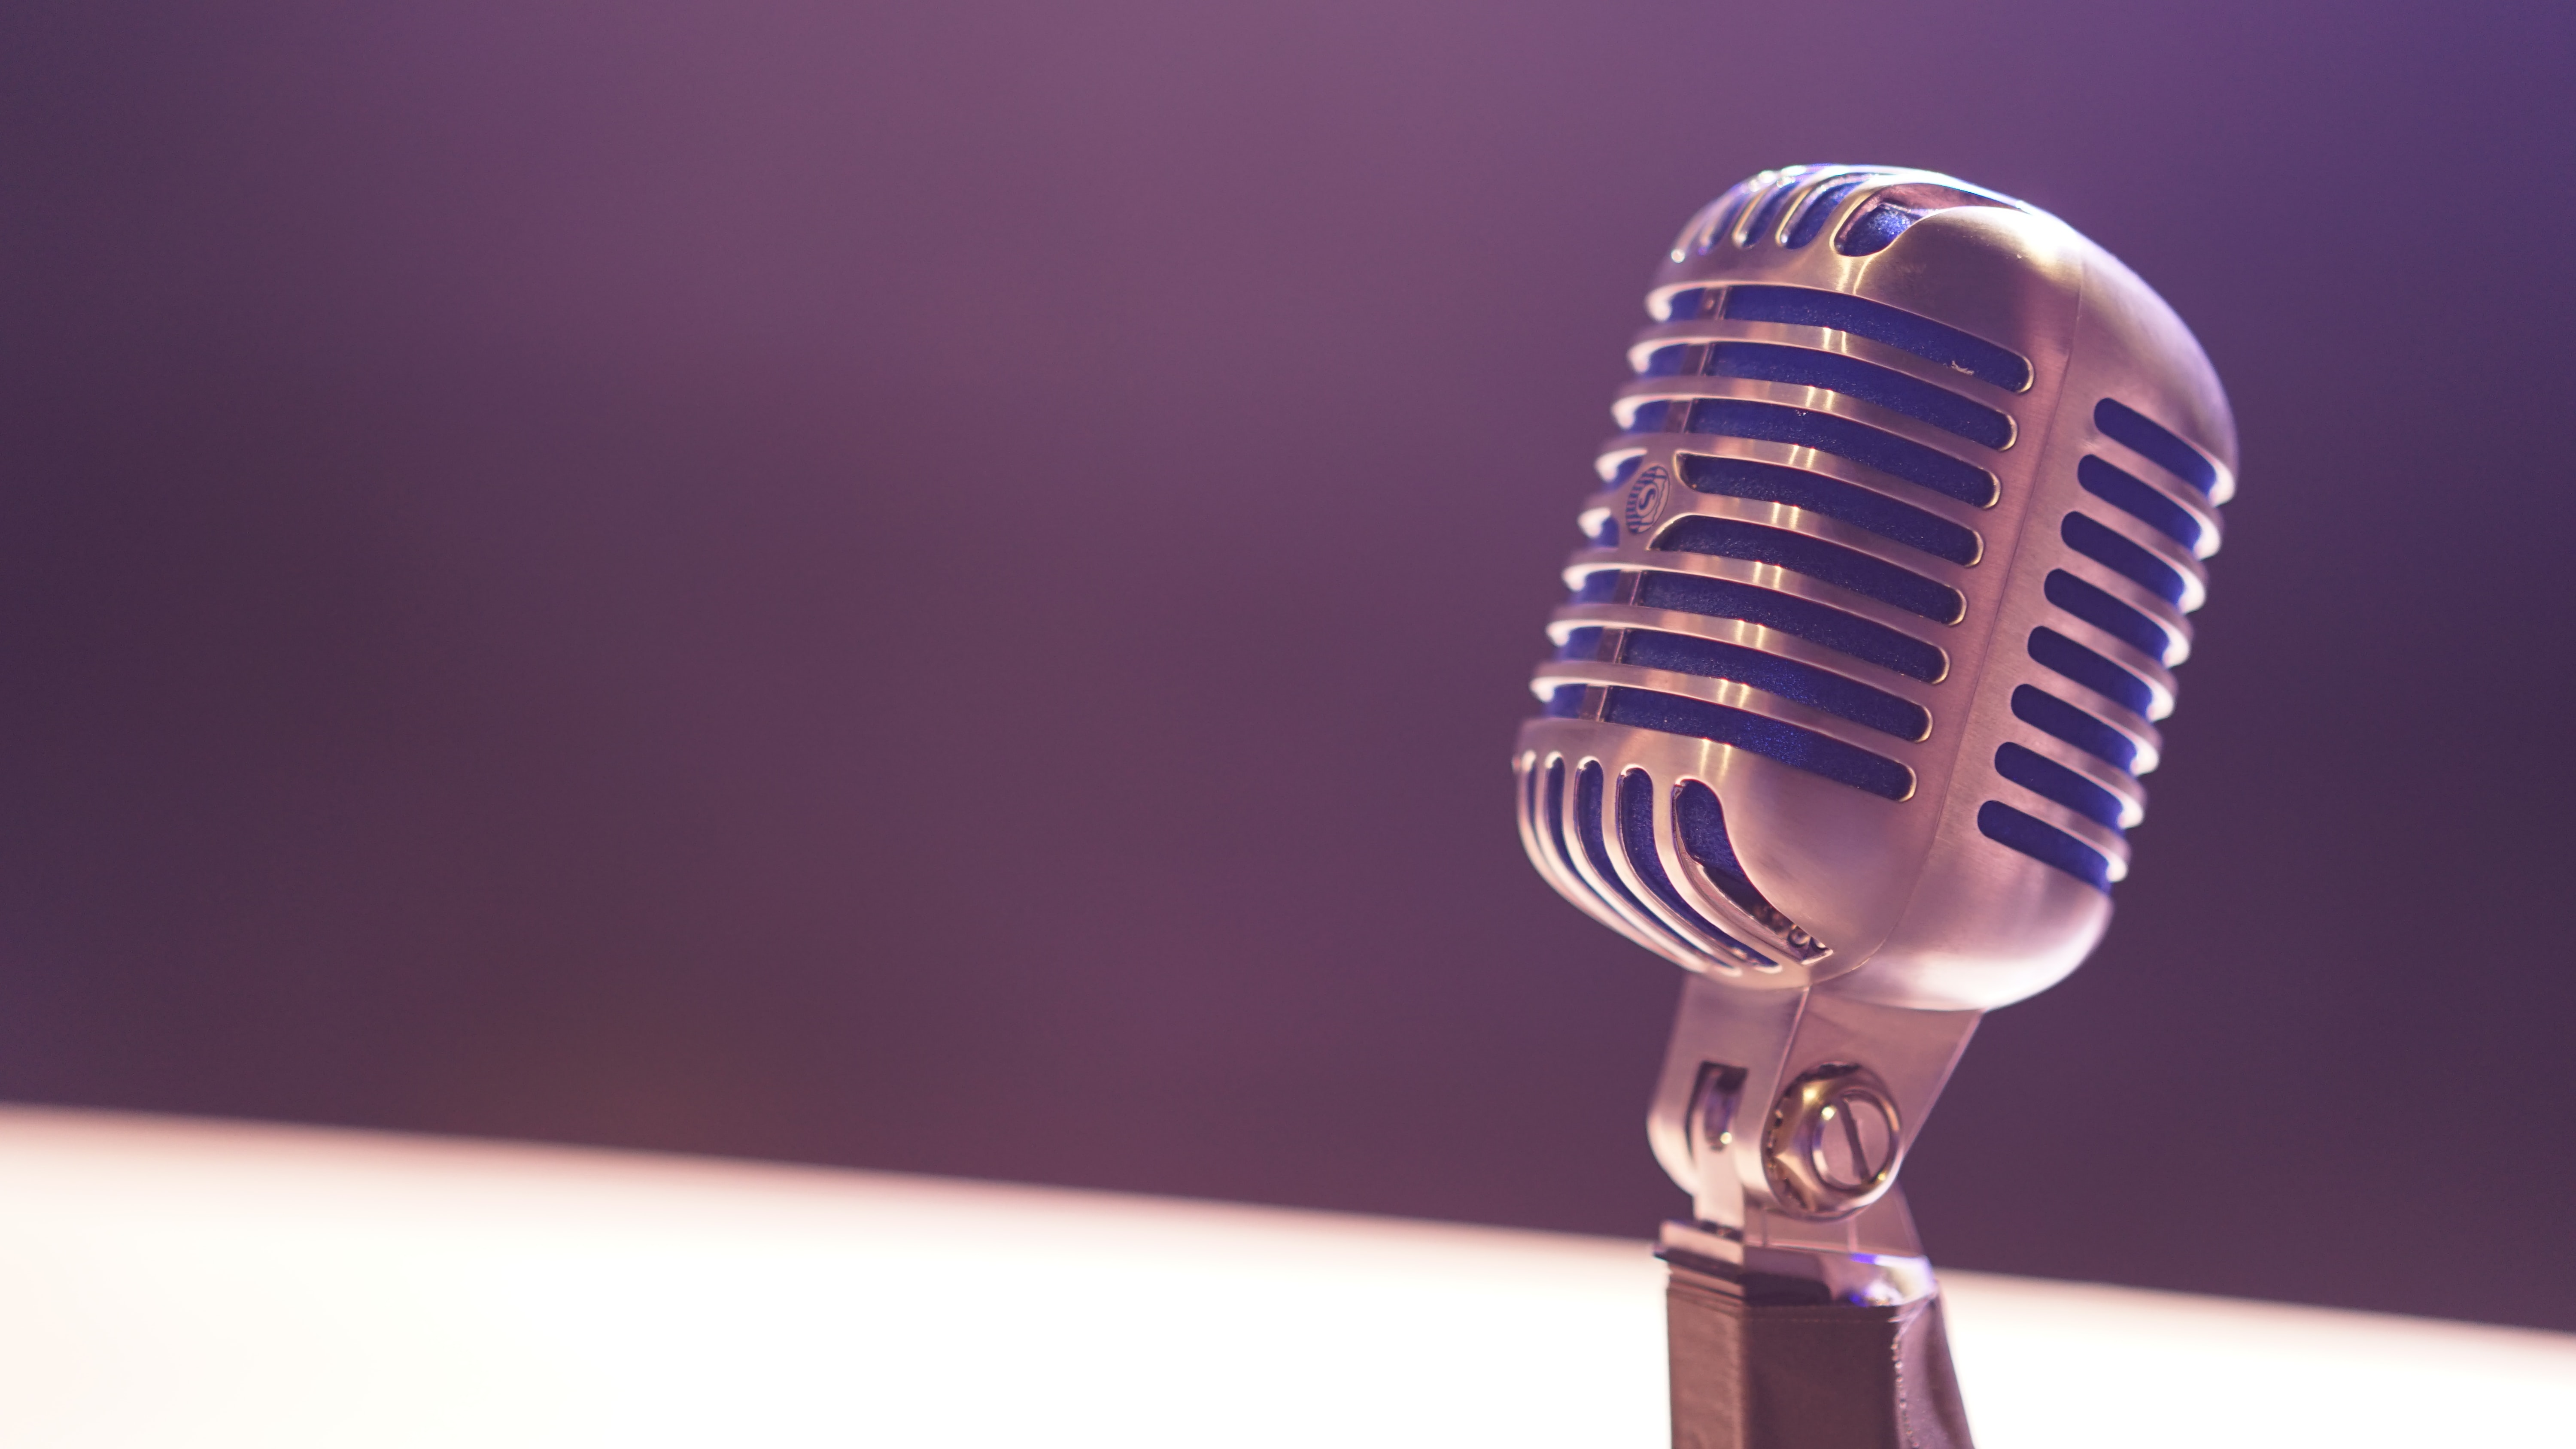 Microphone on a white table with black background.